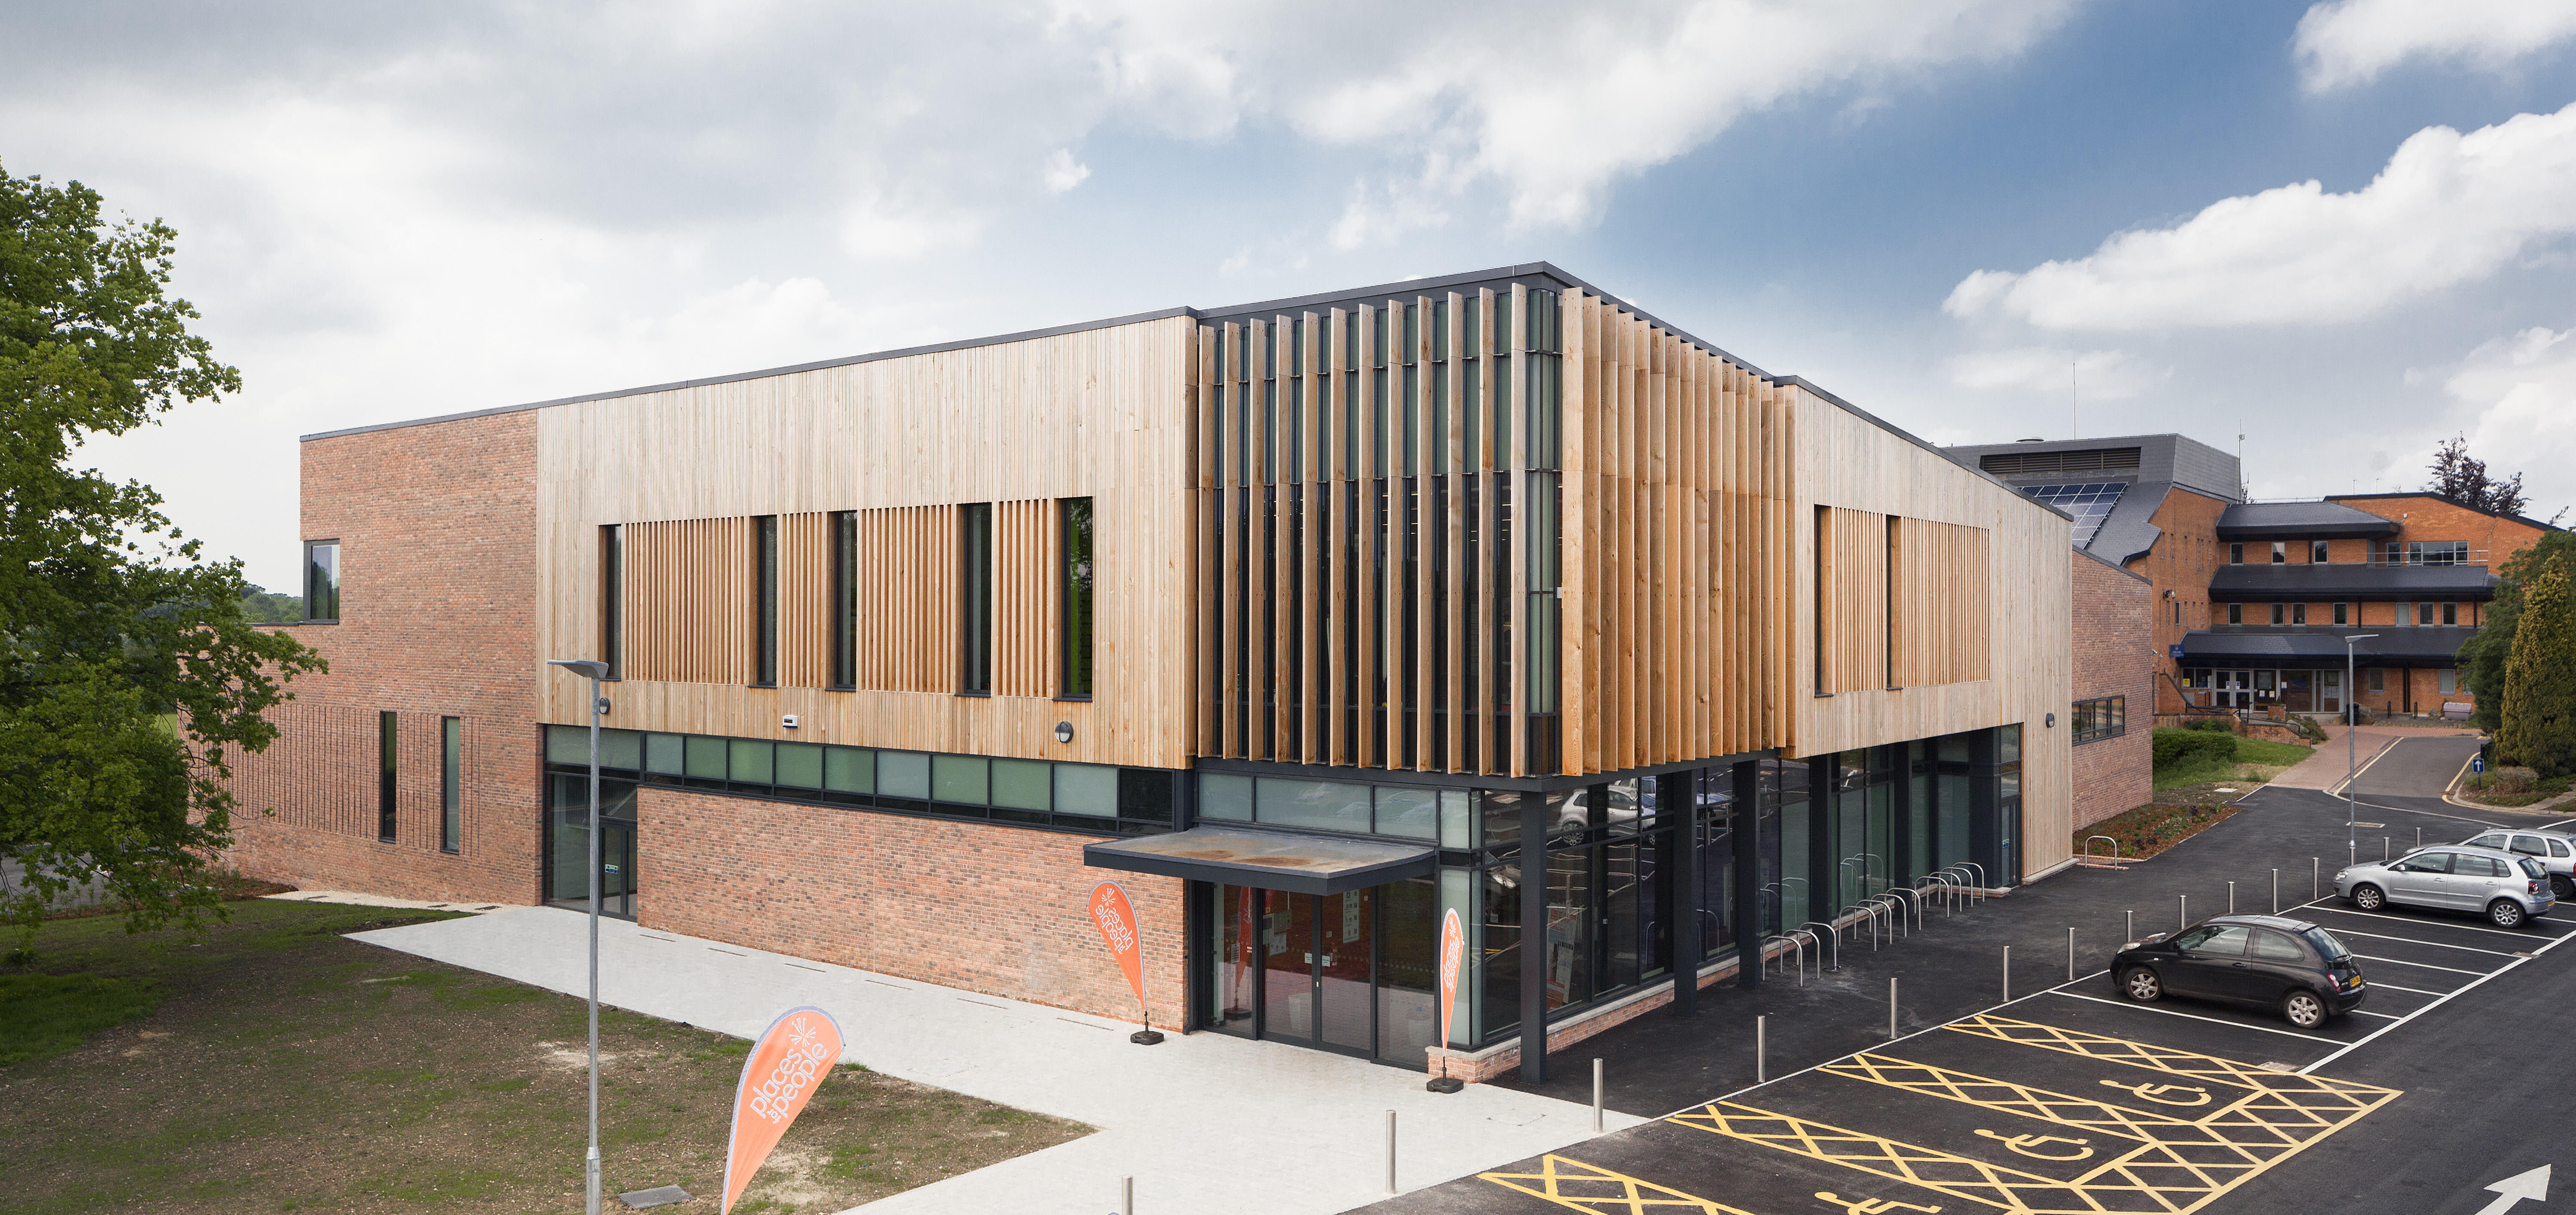 Images Tewkesbury Leisure Centre